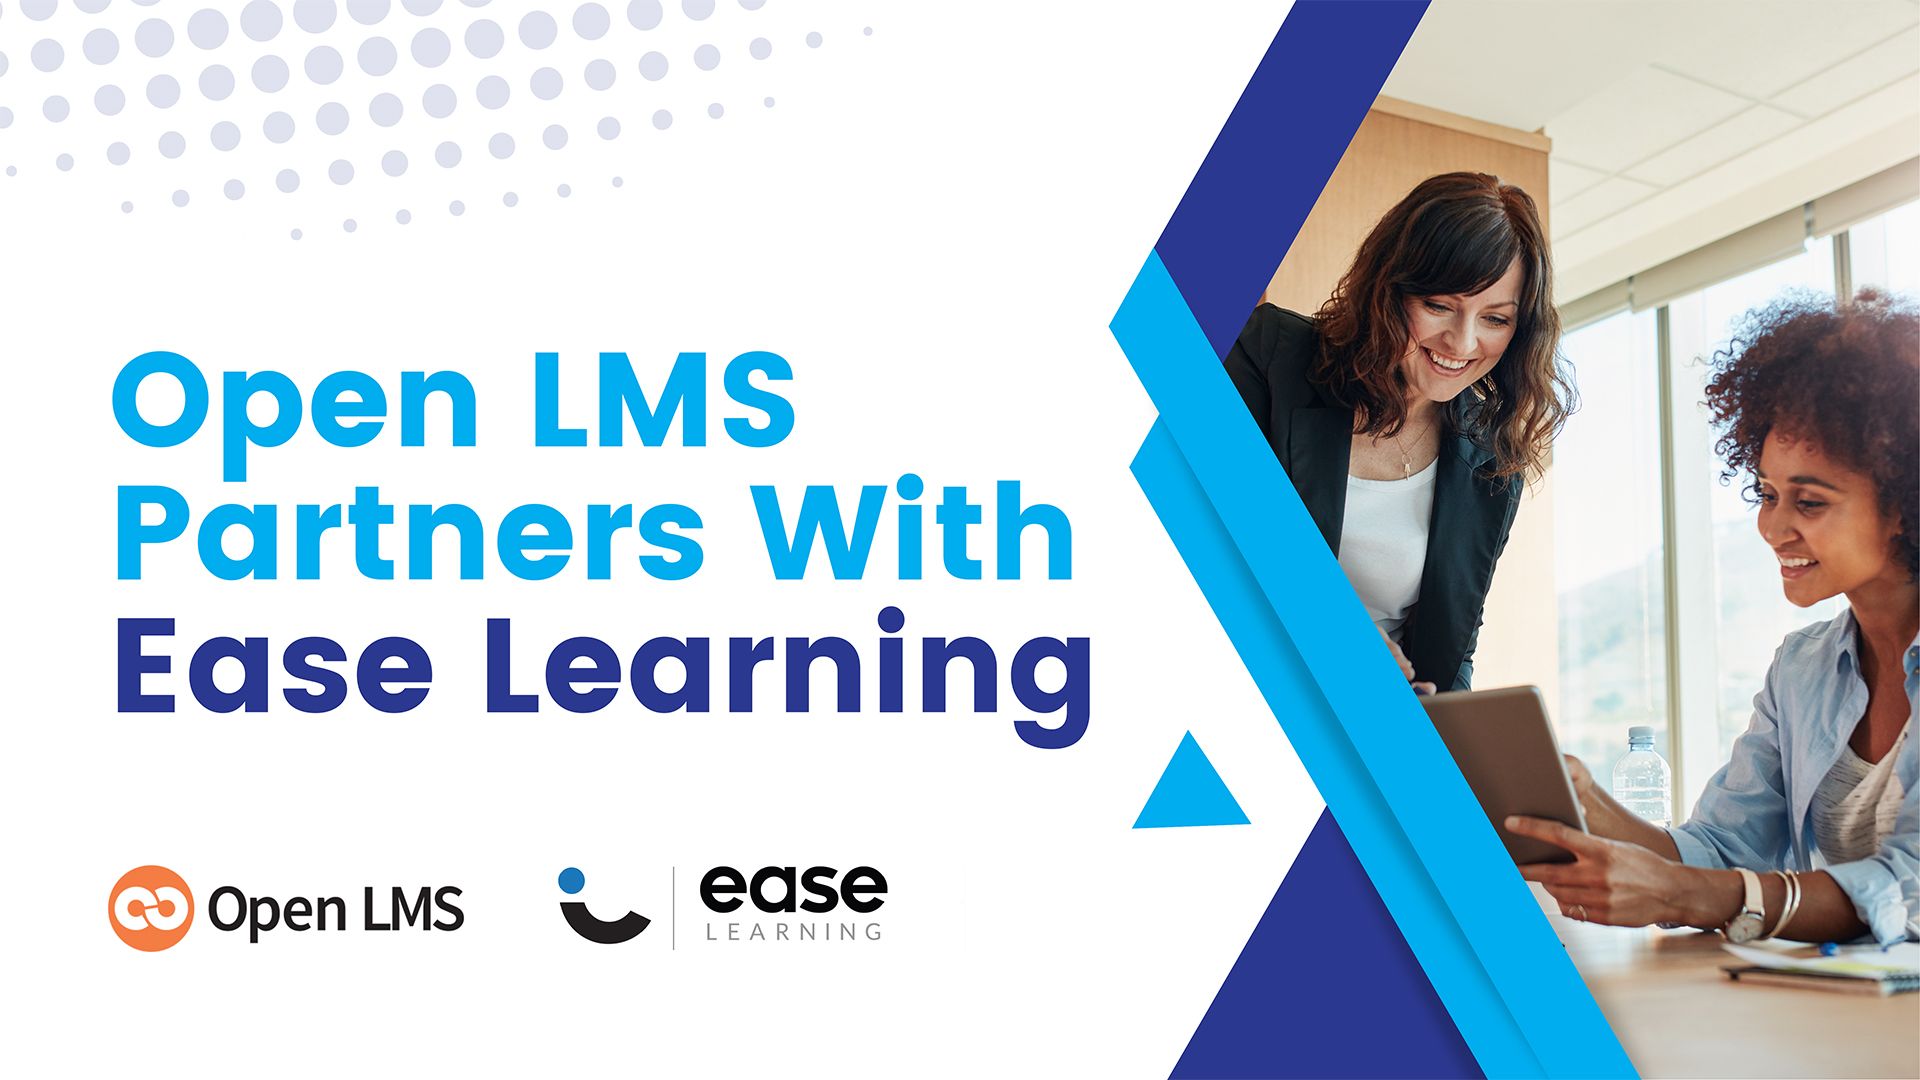 Open LMS Partners With Ease Learning, Integrating the Skillways Platform to Strengthen Skills-Based Learning Outcomes